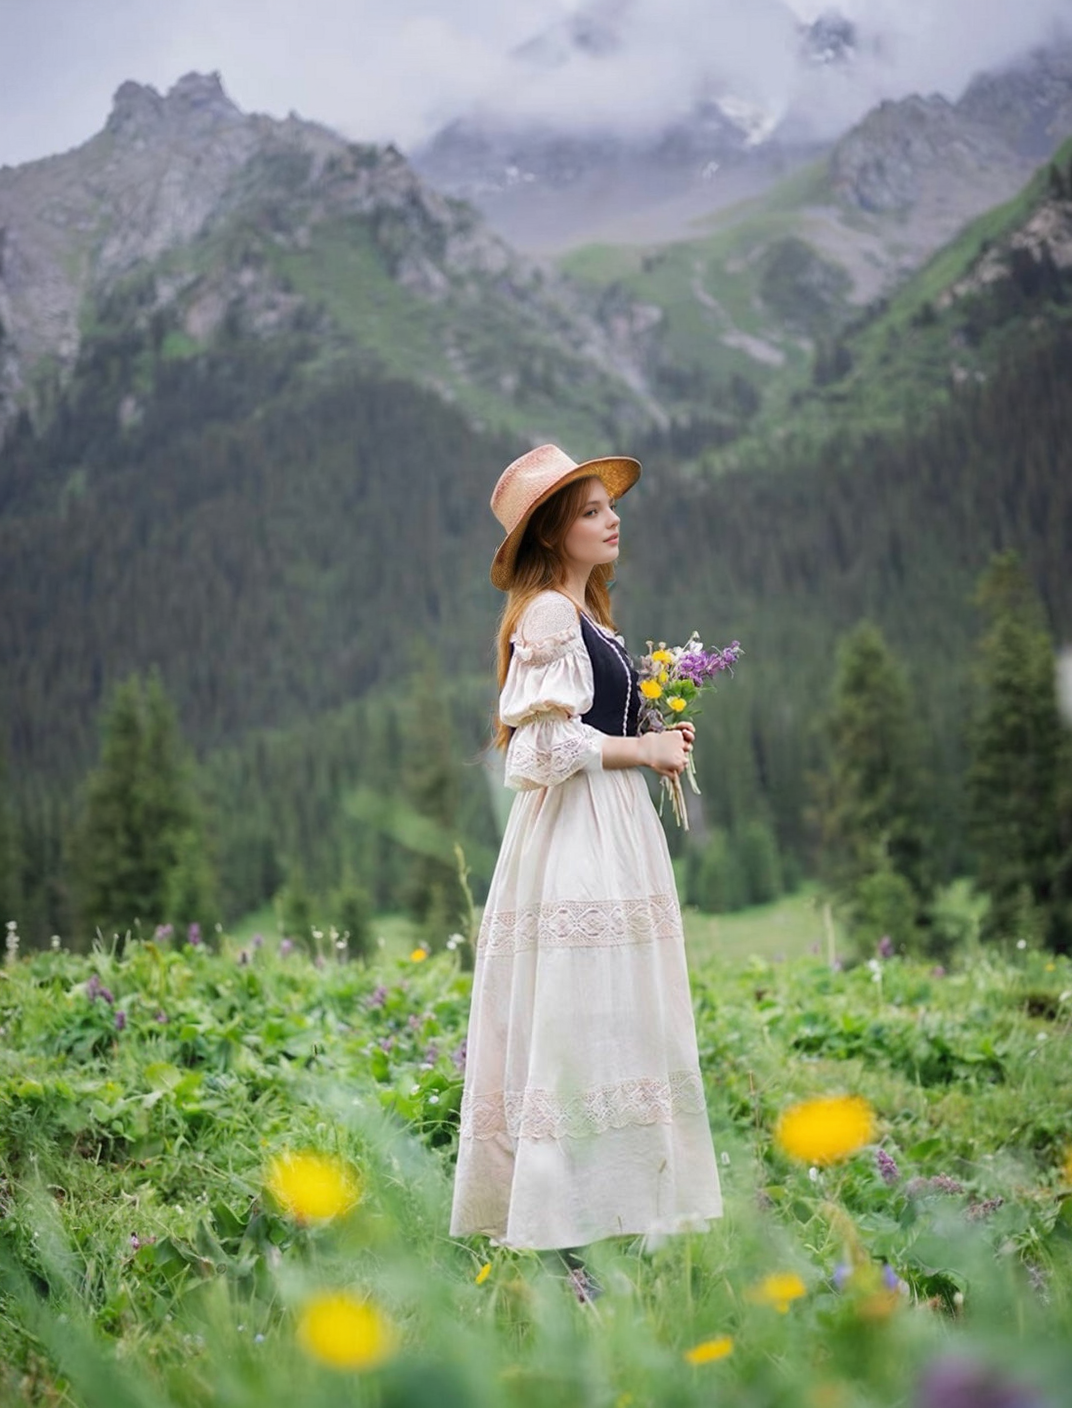 "Meadow Muse."